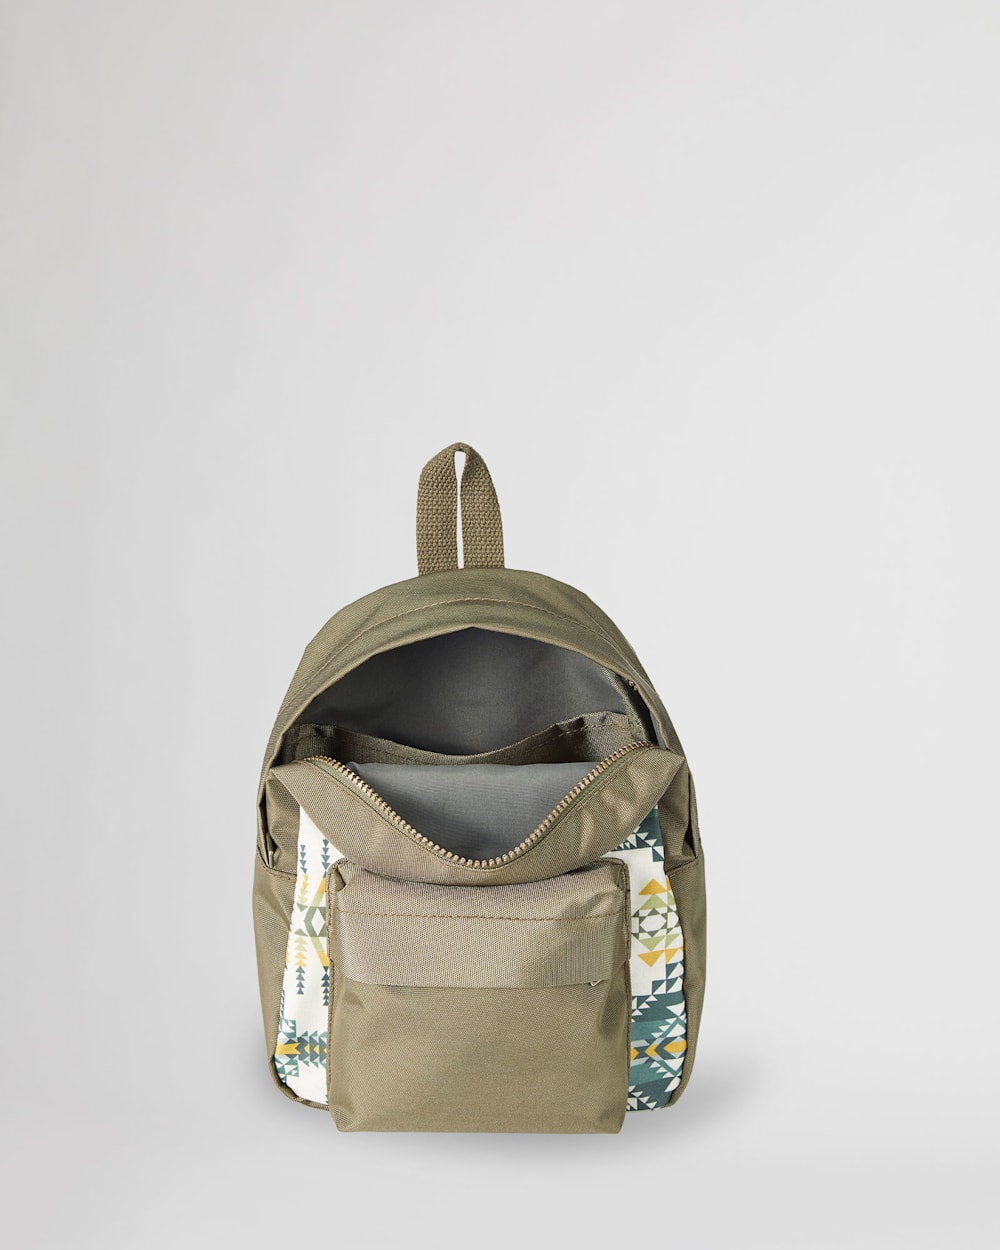 ALTERNATE VIEW OF PILOT ROCK CANOPY CANVAS MINI BACKPACK IN OLIVE image number 2